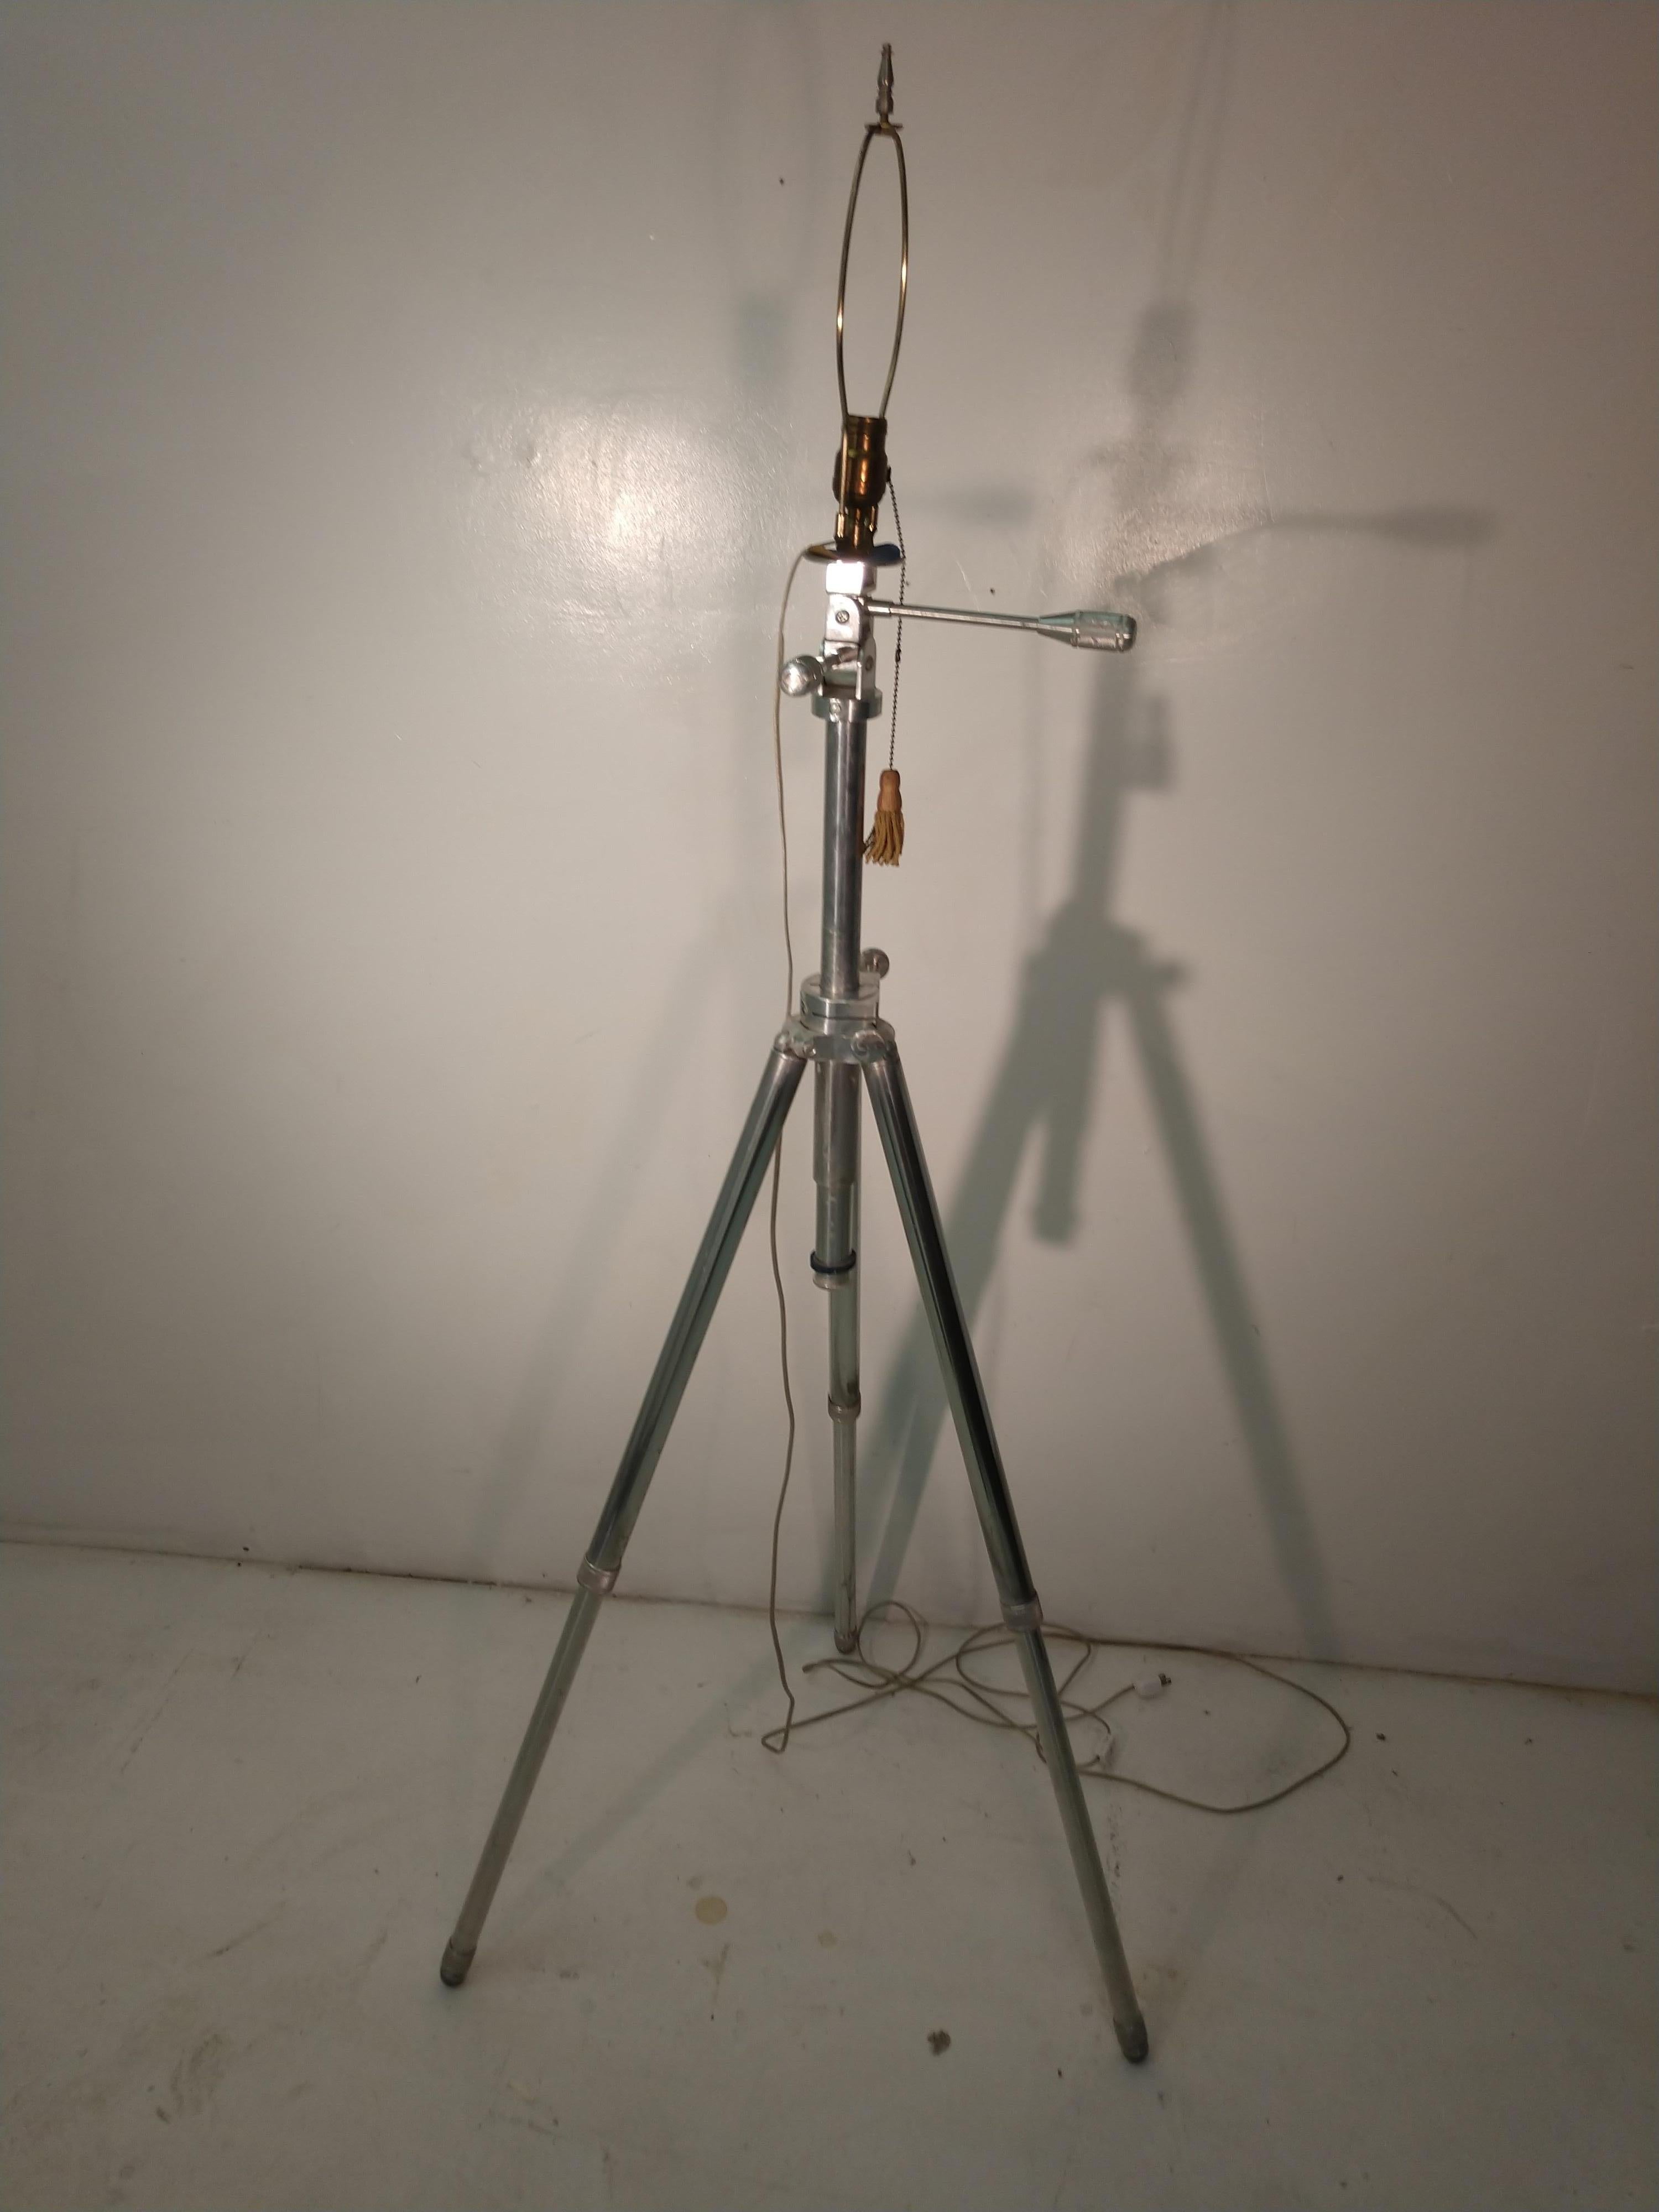 Fabulous converted telescoping camera stand into a floor lamp. Measurements given are for photos, this lamp is fully adjustable and even the top portion can be tilted. Shade is damaged on one side so not included. Stand is all milled aluminum.